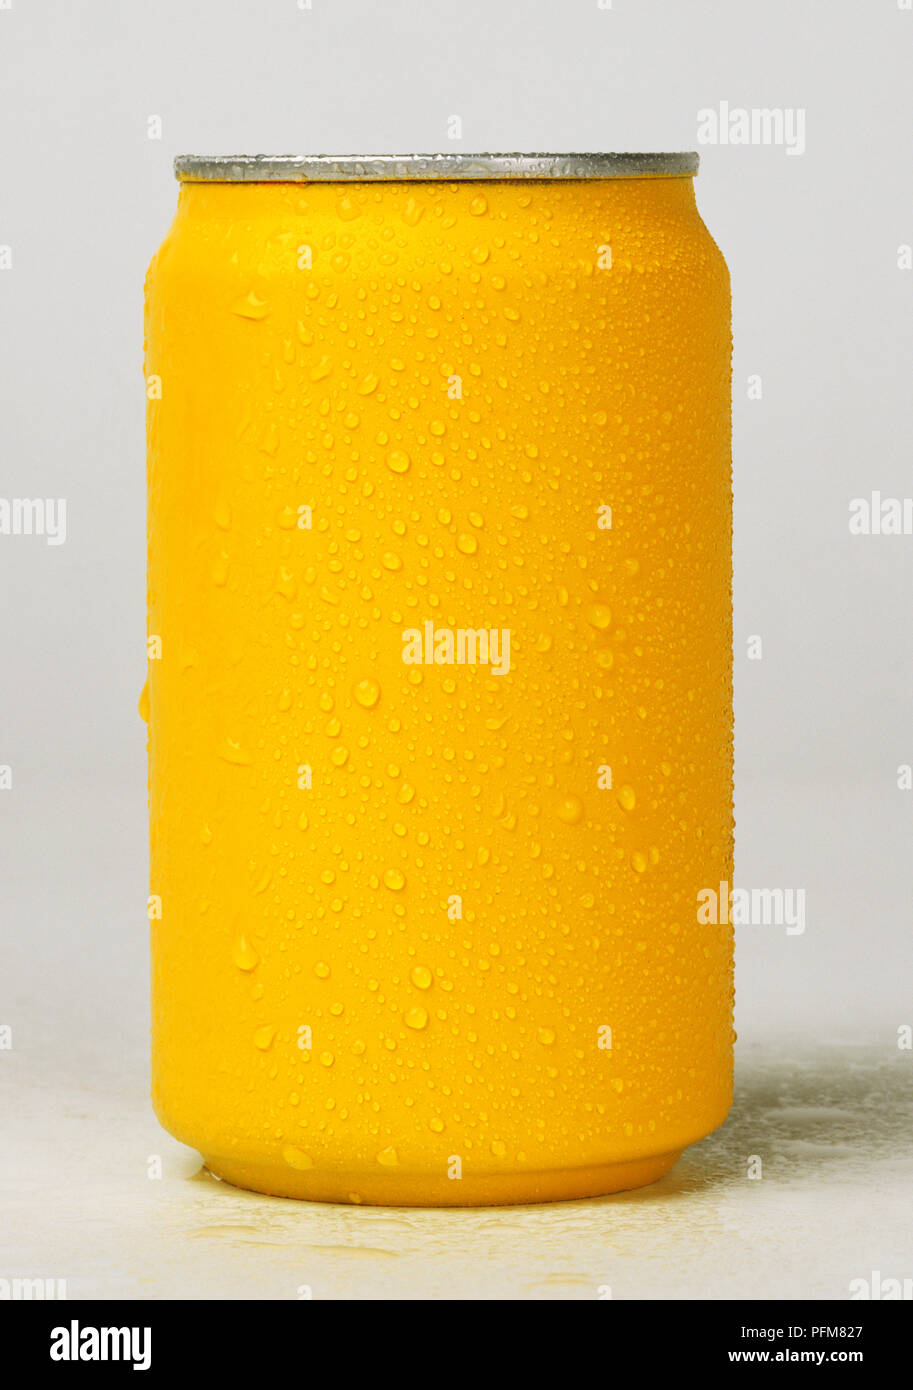 Download Yellow Drinks Can With Condensation Stock Photo Alamy Yellowimages Mockups